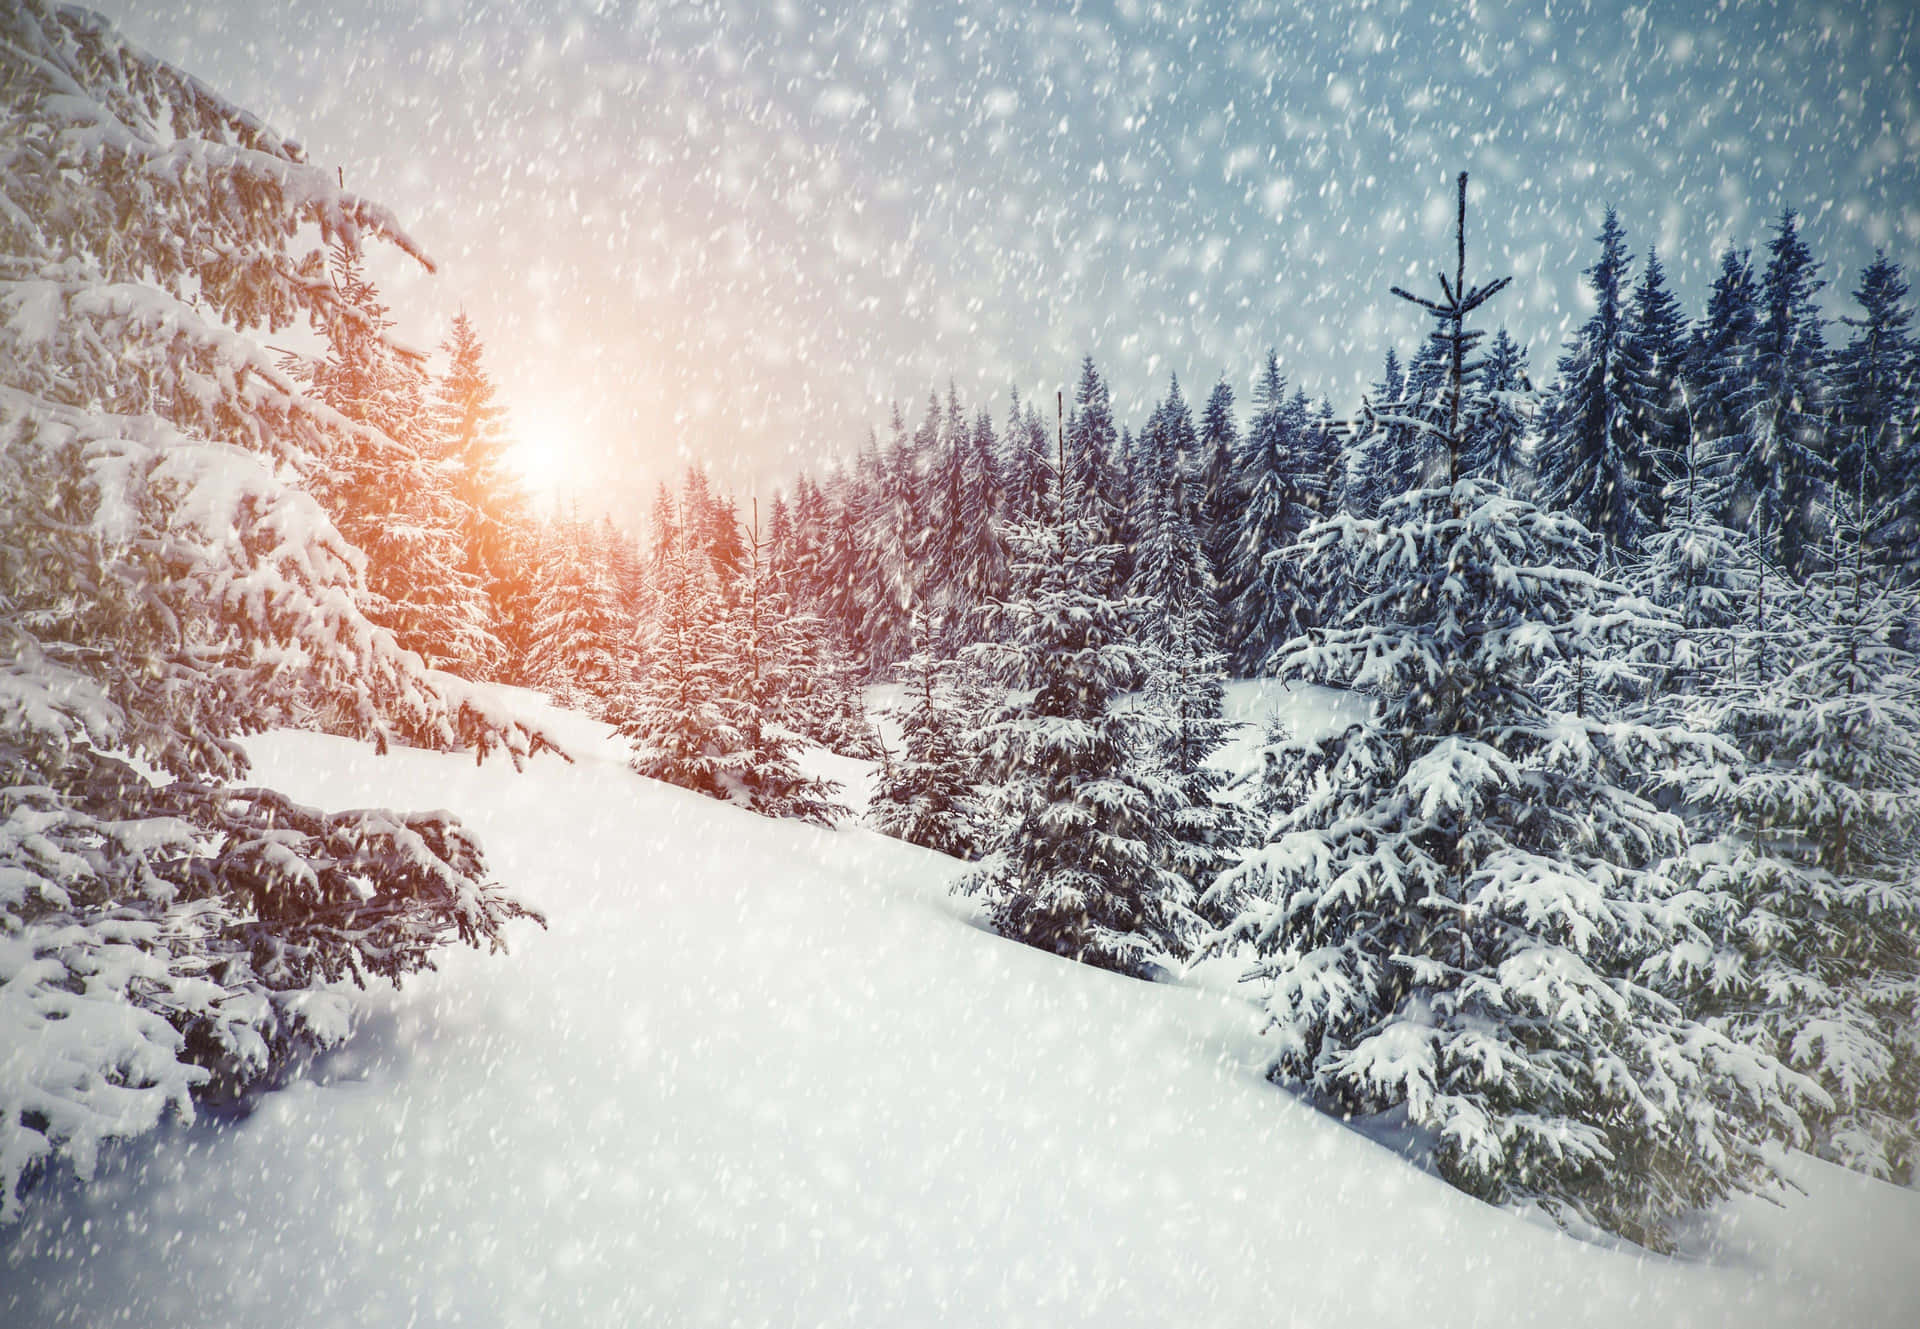 A View of Christmas Snow in the Wintertime Wallpaper